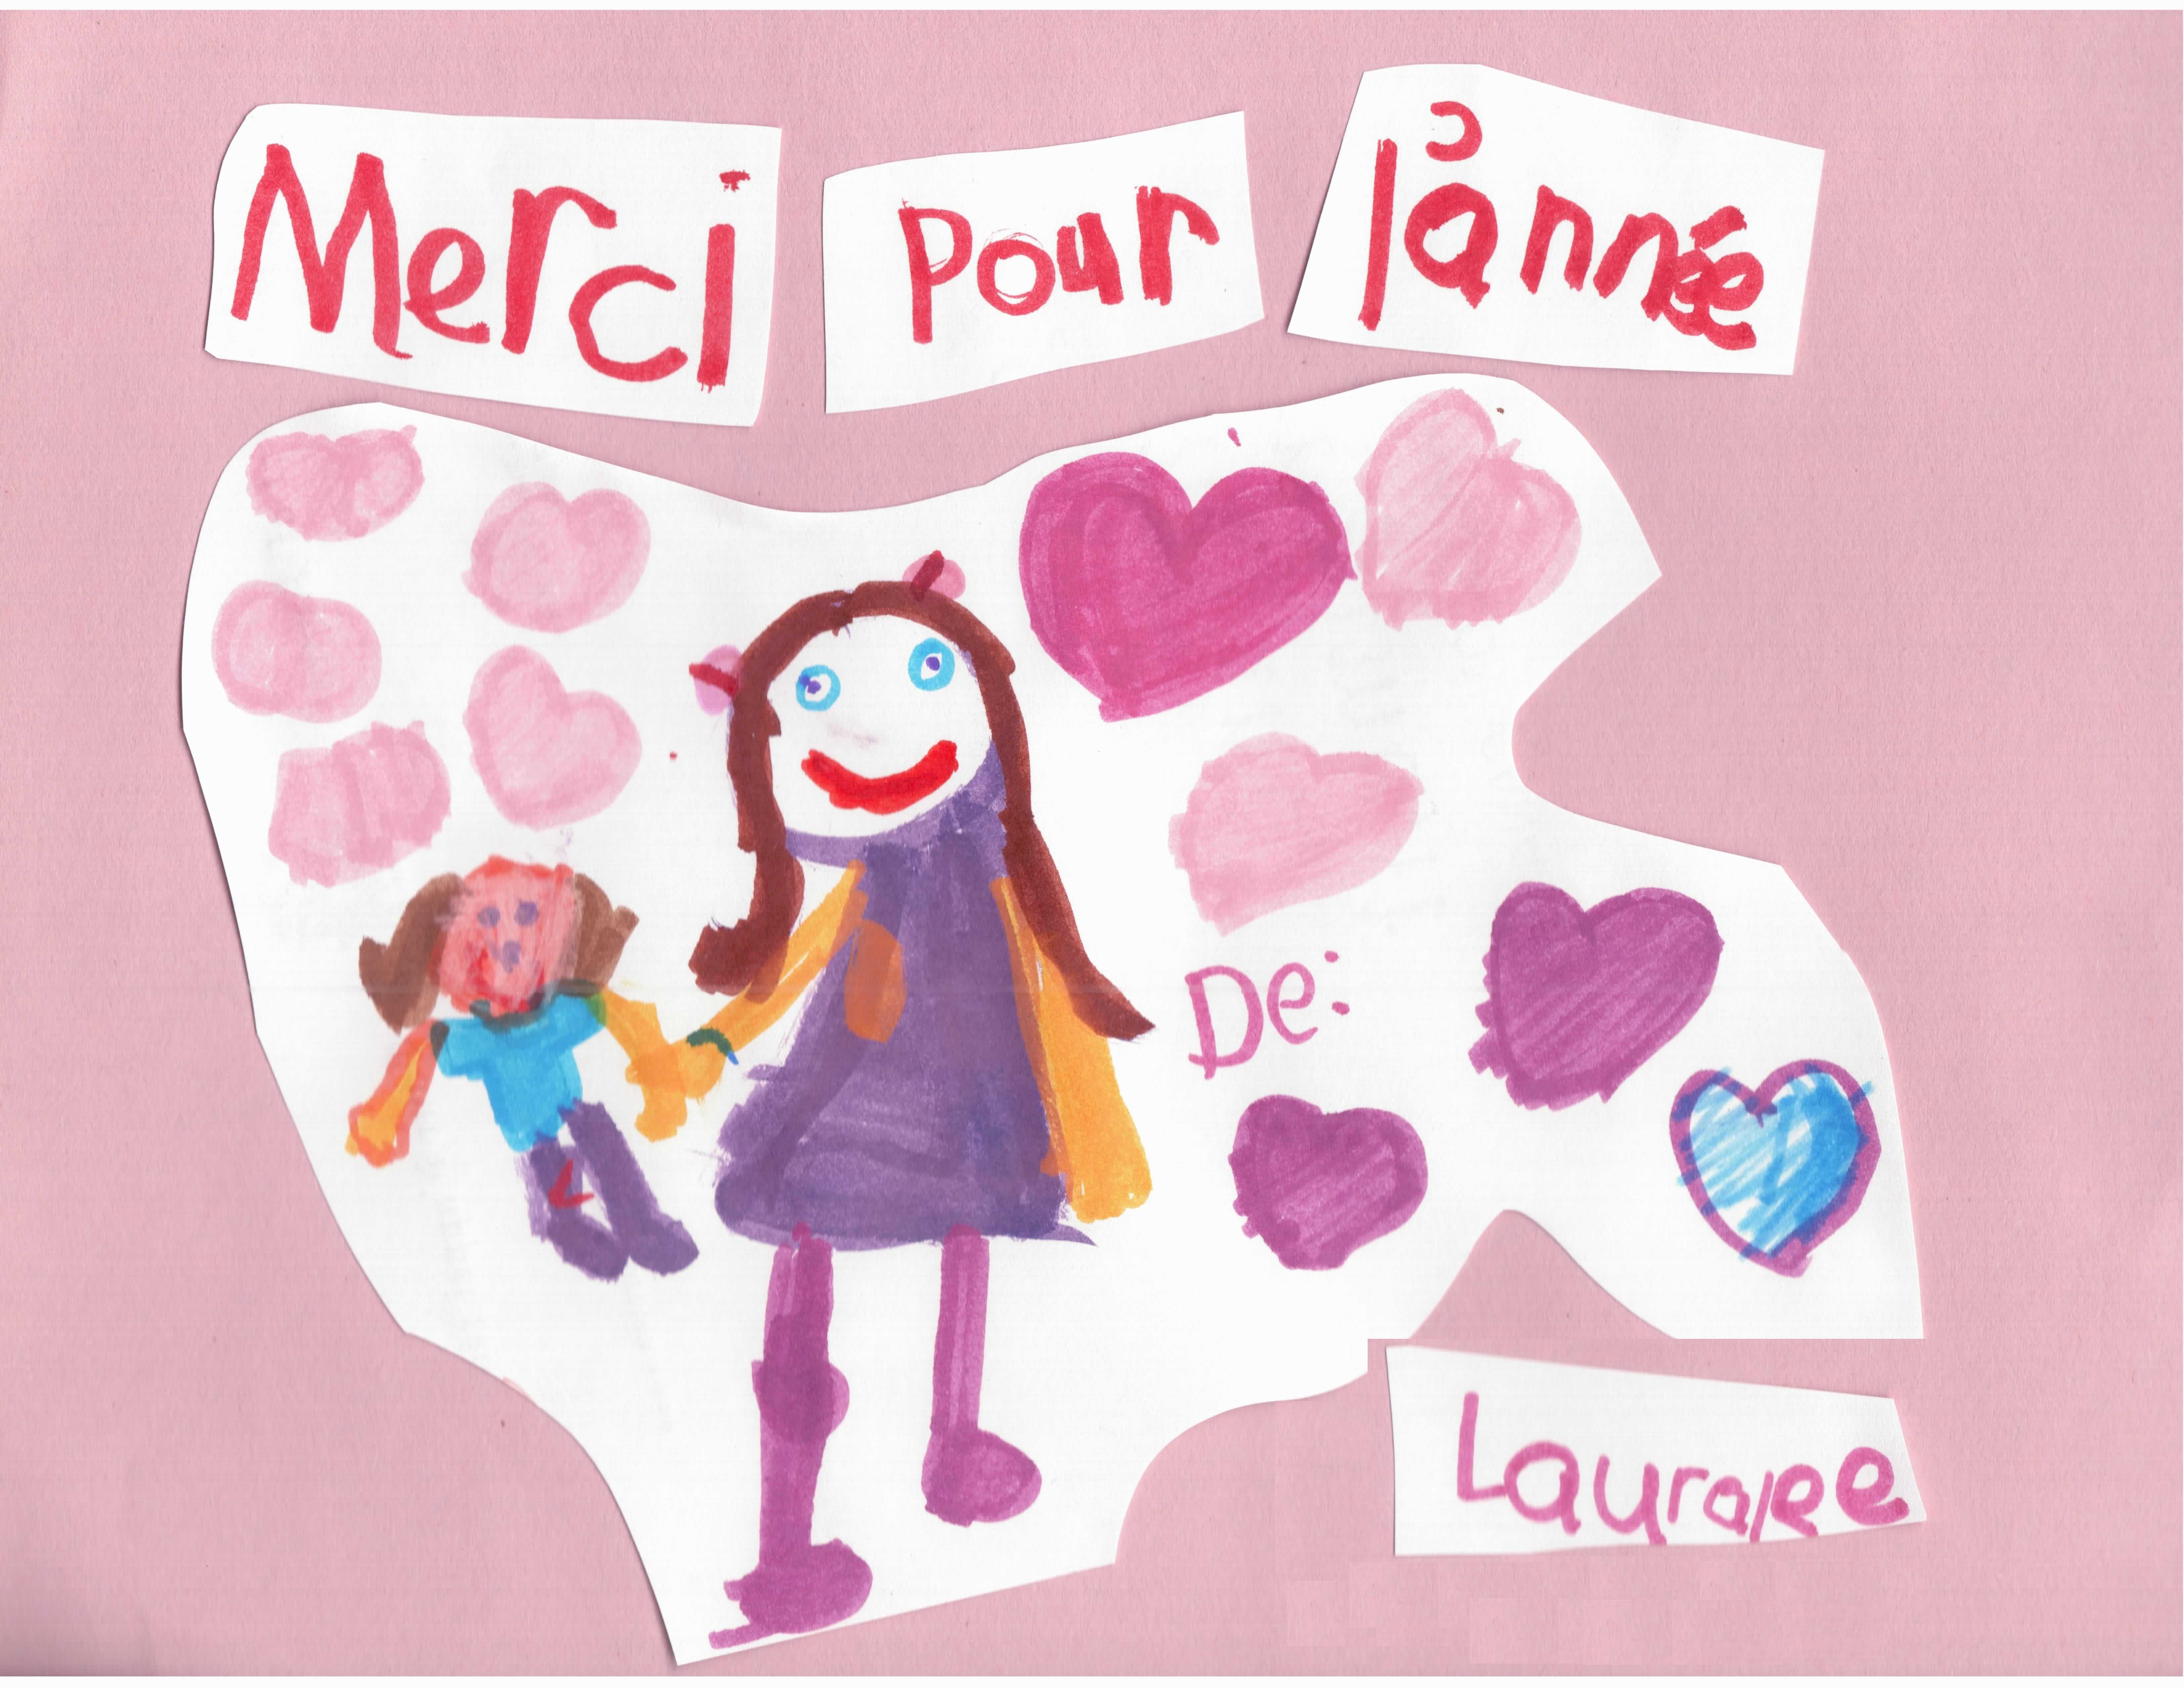 Merci pour l’année – Thanks for the year